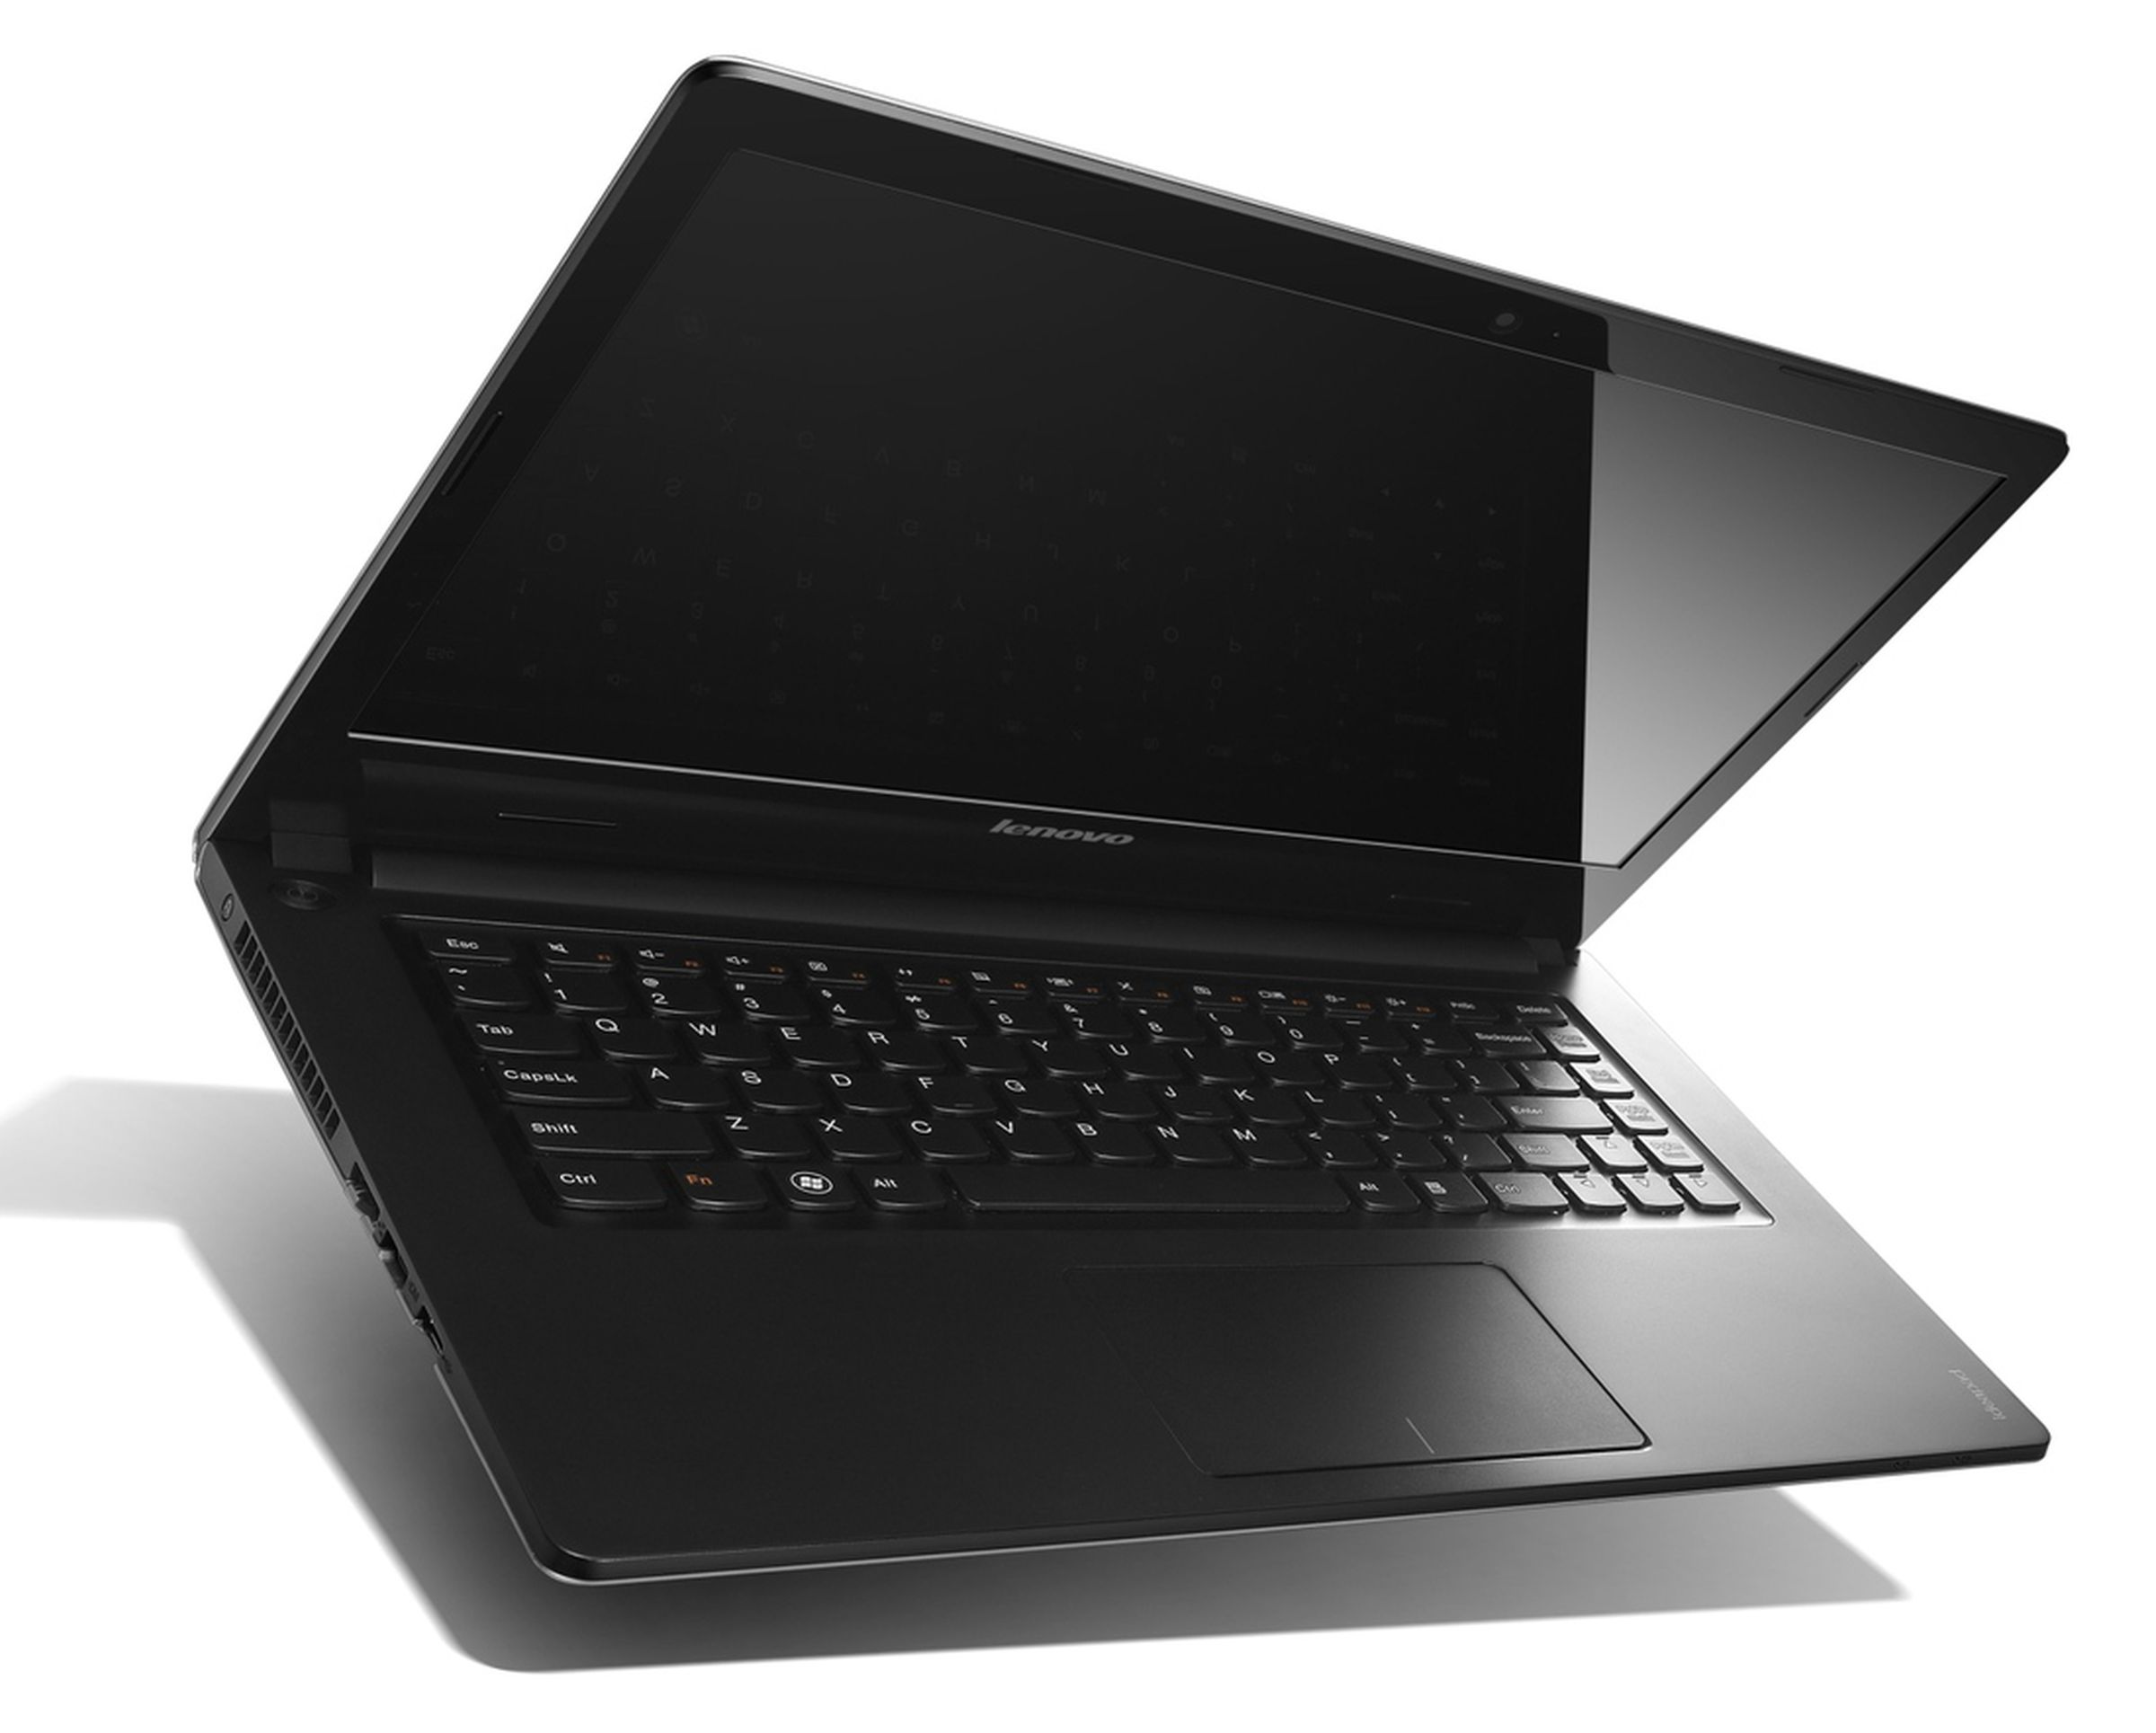 Lenovo IdeaPad S300, S400 and S405 press pictures